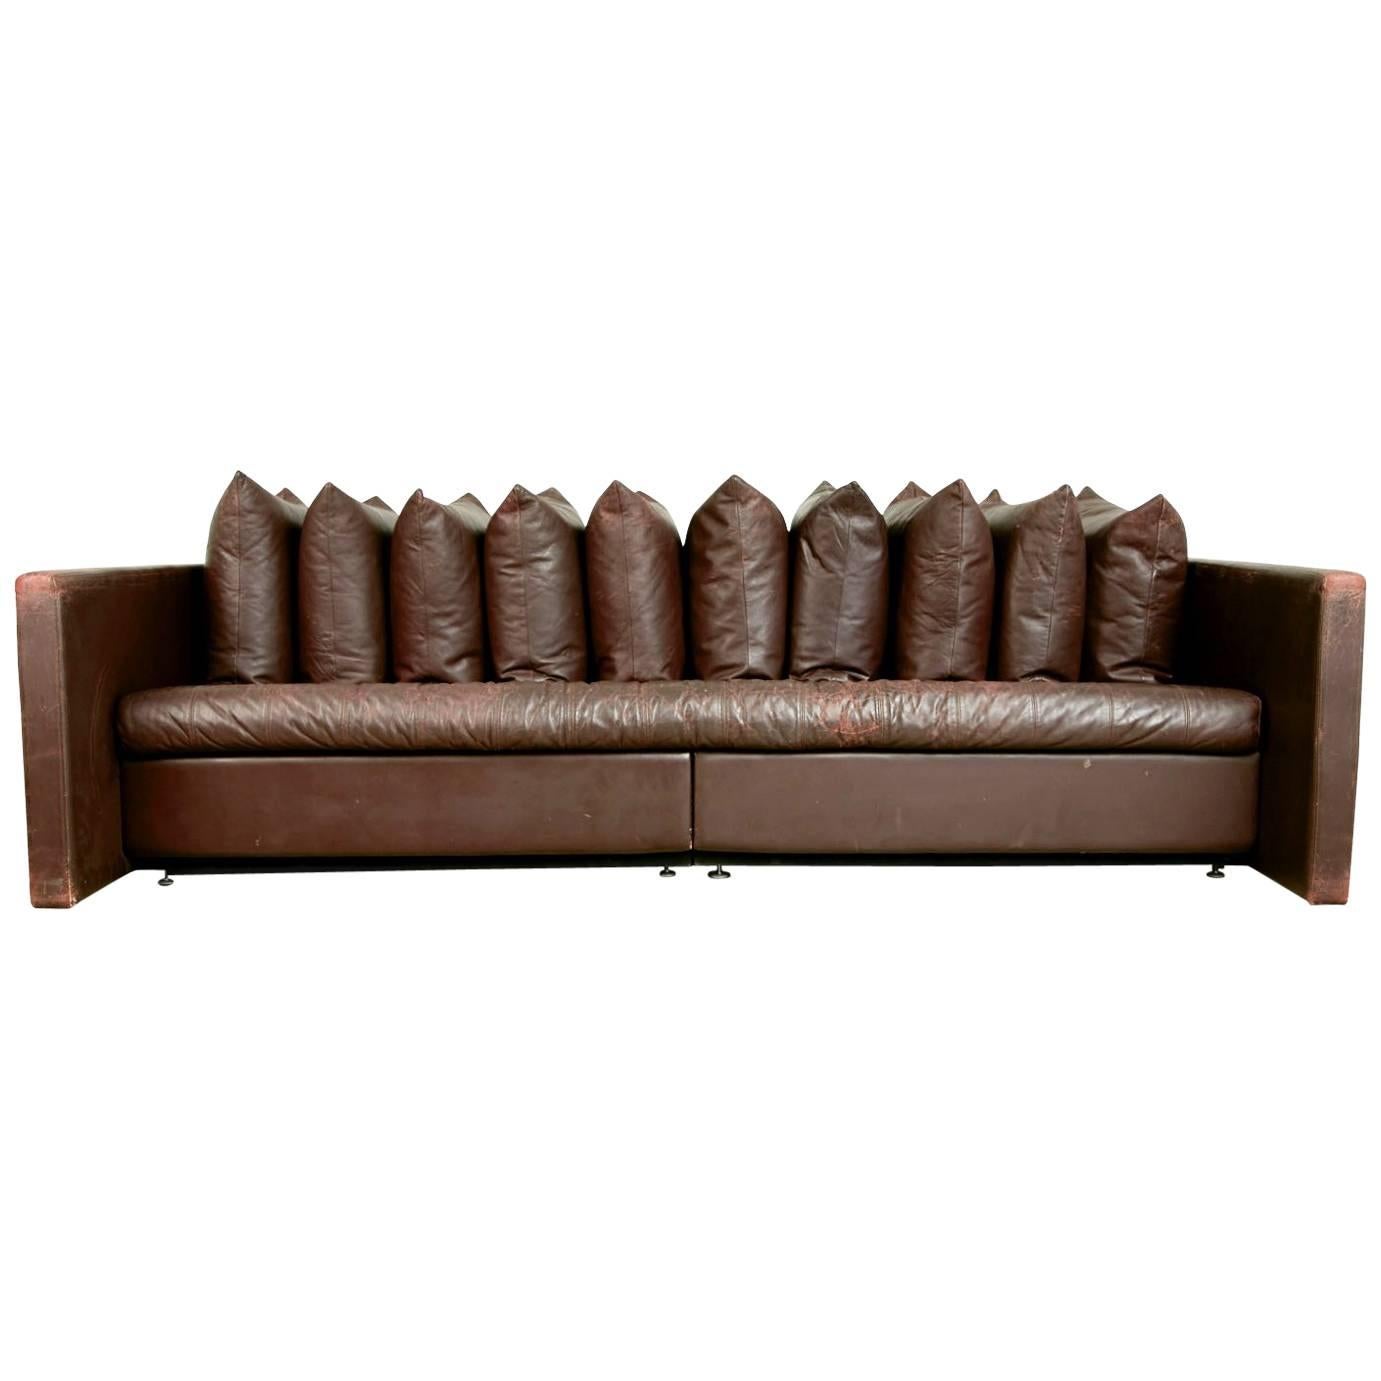 Architectural Leather Sofa by Joseph D'Urso for Knoll International, circa 1980